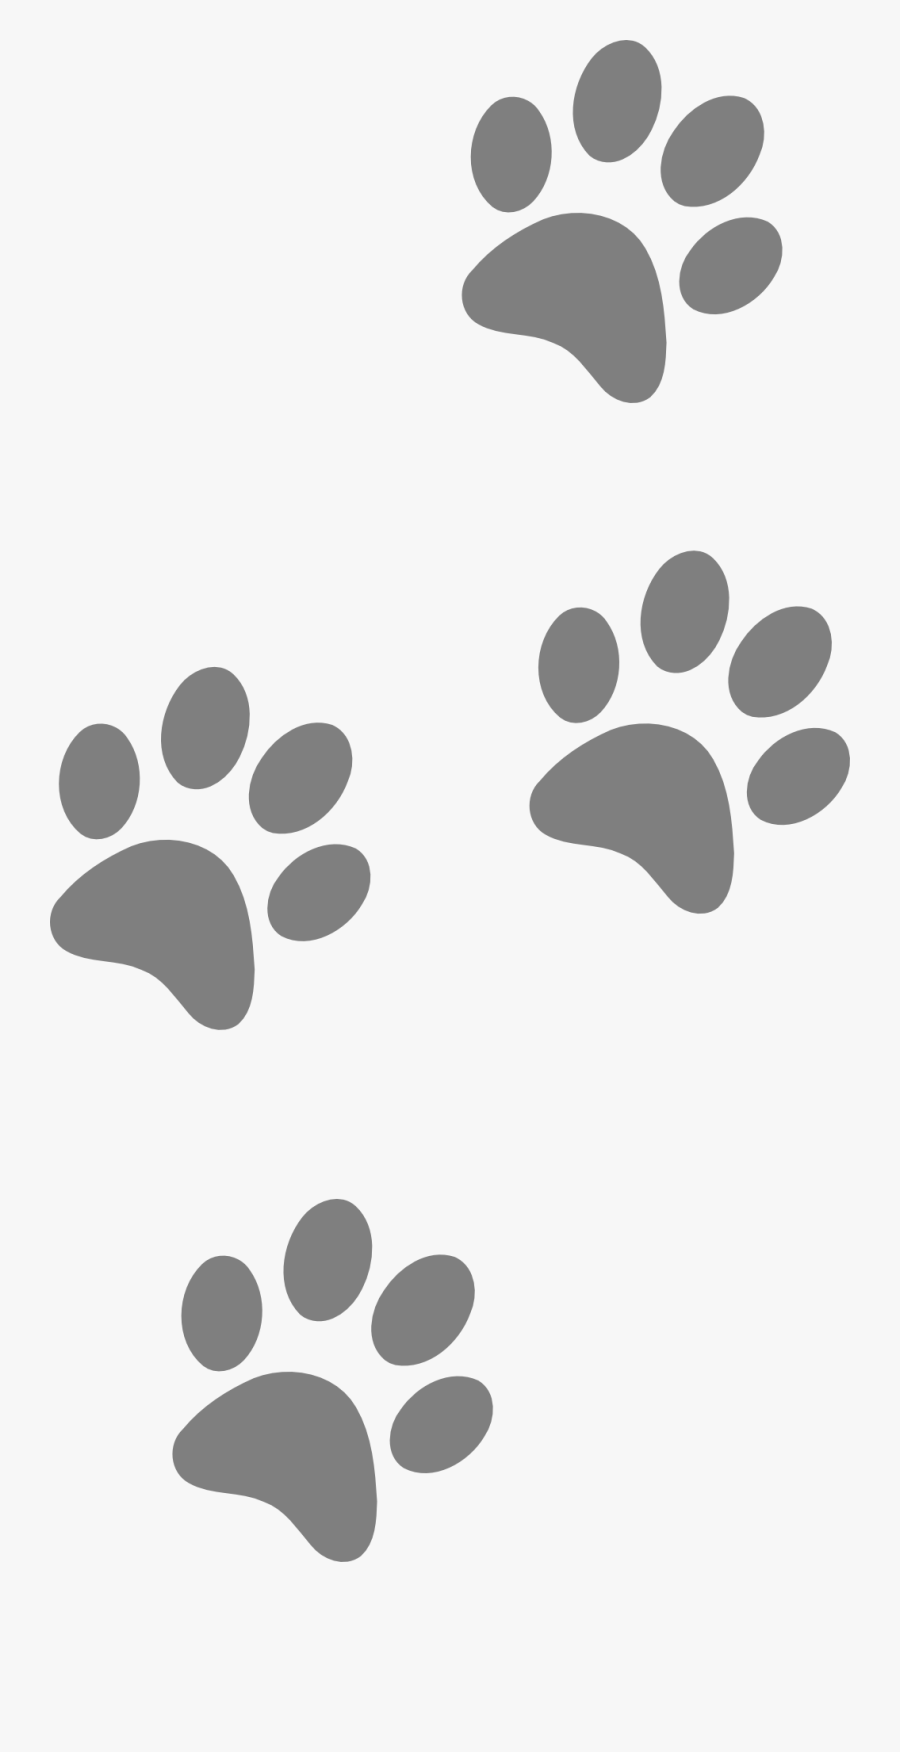 Free Image On Pixabay - Blue And Gold Paw Print, Transparent Clipart